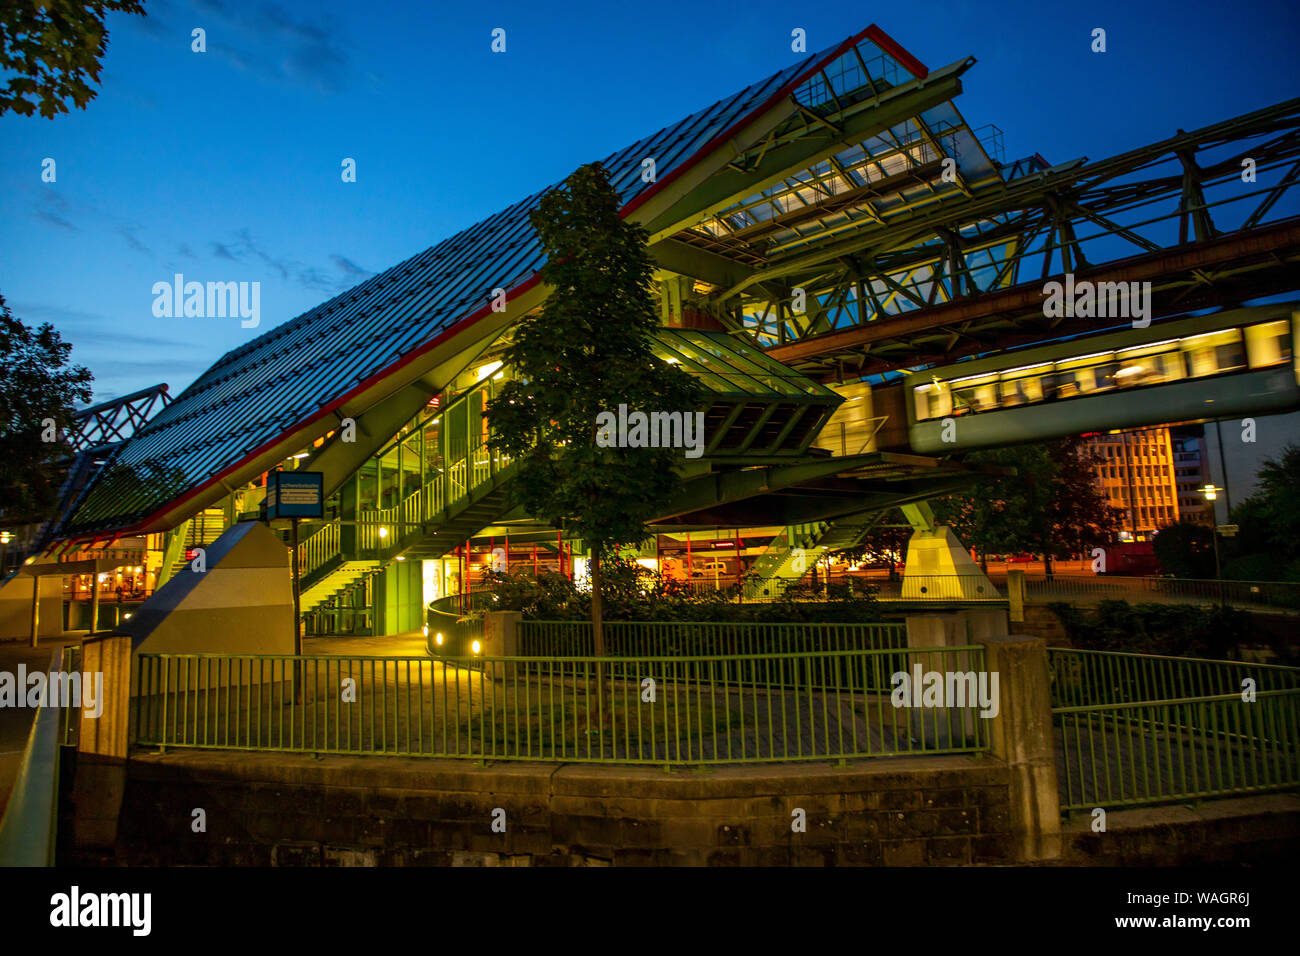 The Wuppertal suspension railway, train of the latest generation 15, Wuppertal, Germany, Kluse station, Stock Photo